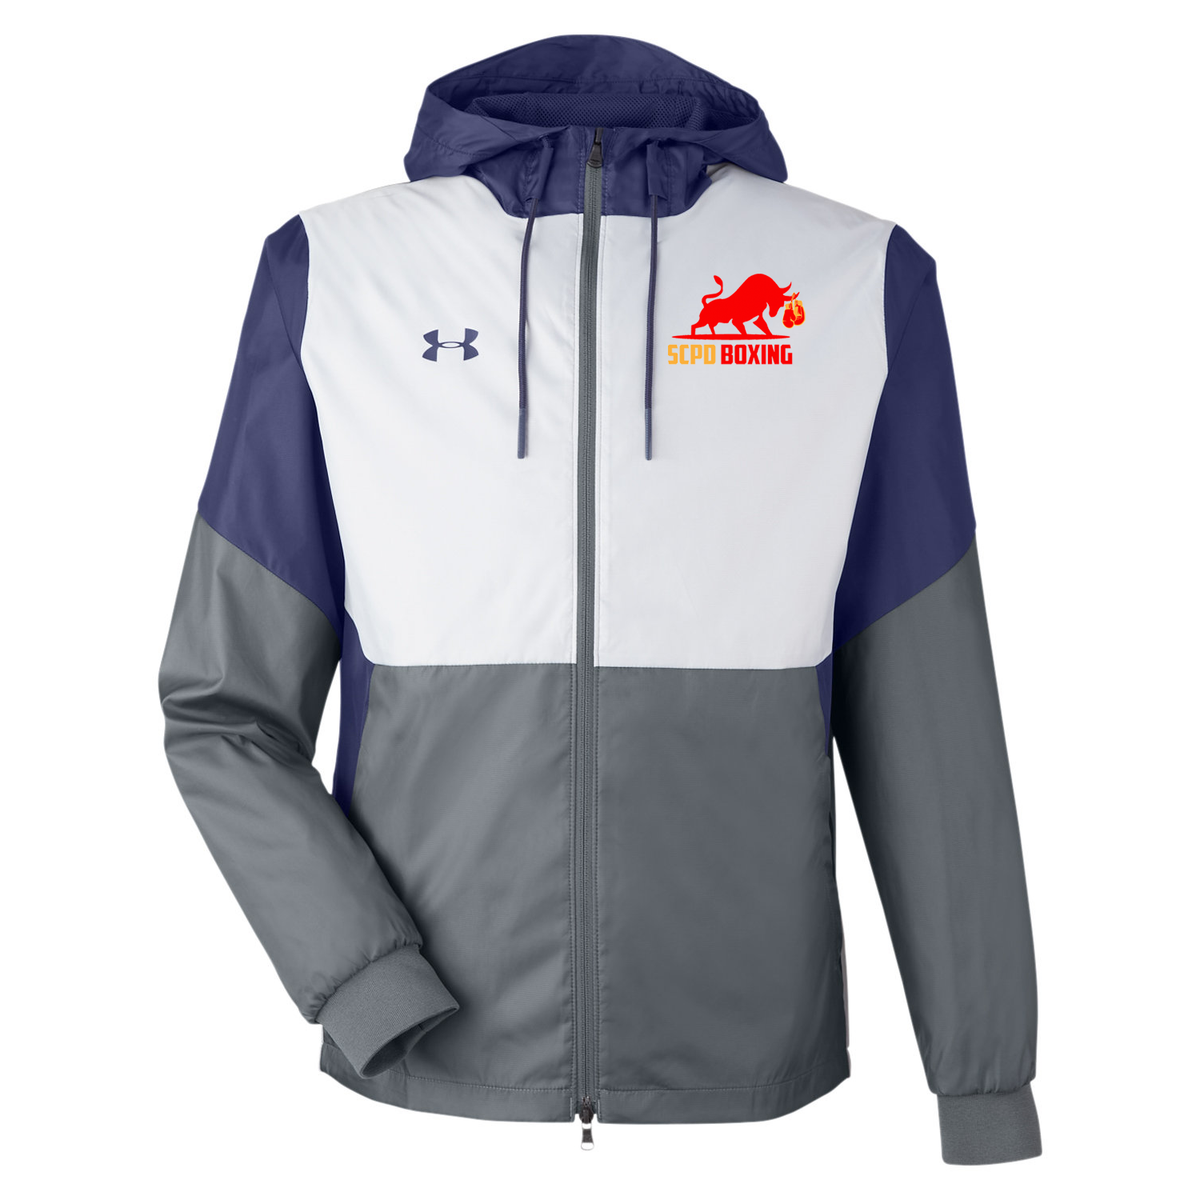 SCPD Boxing Under Armour Men's Team Legacy Jacket